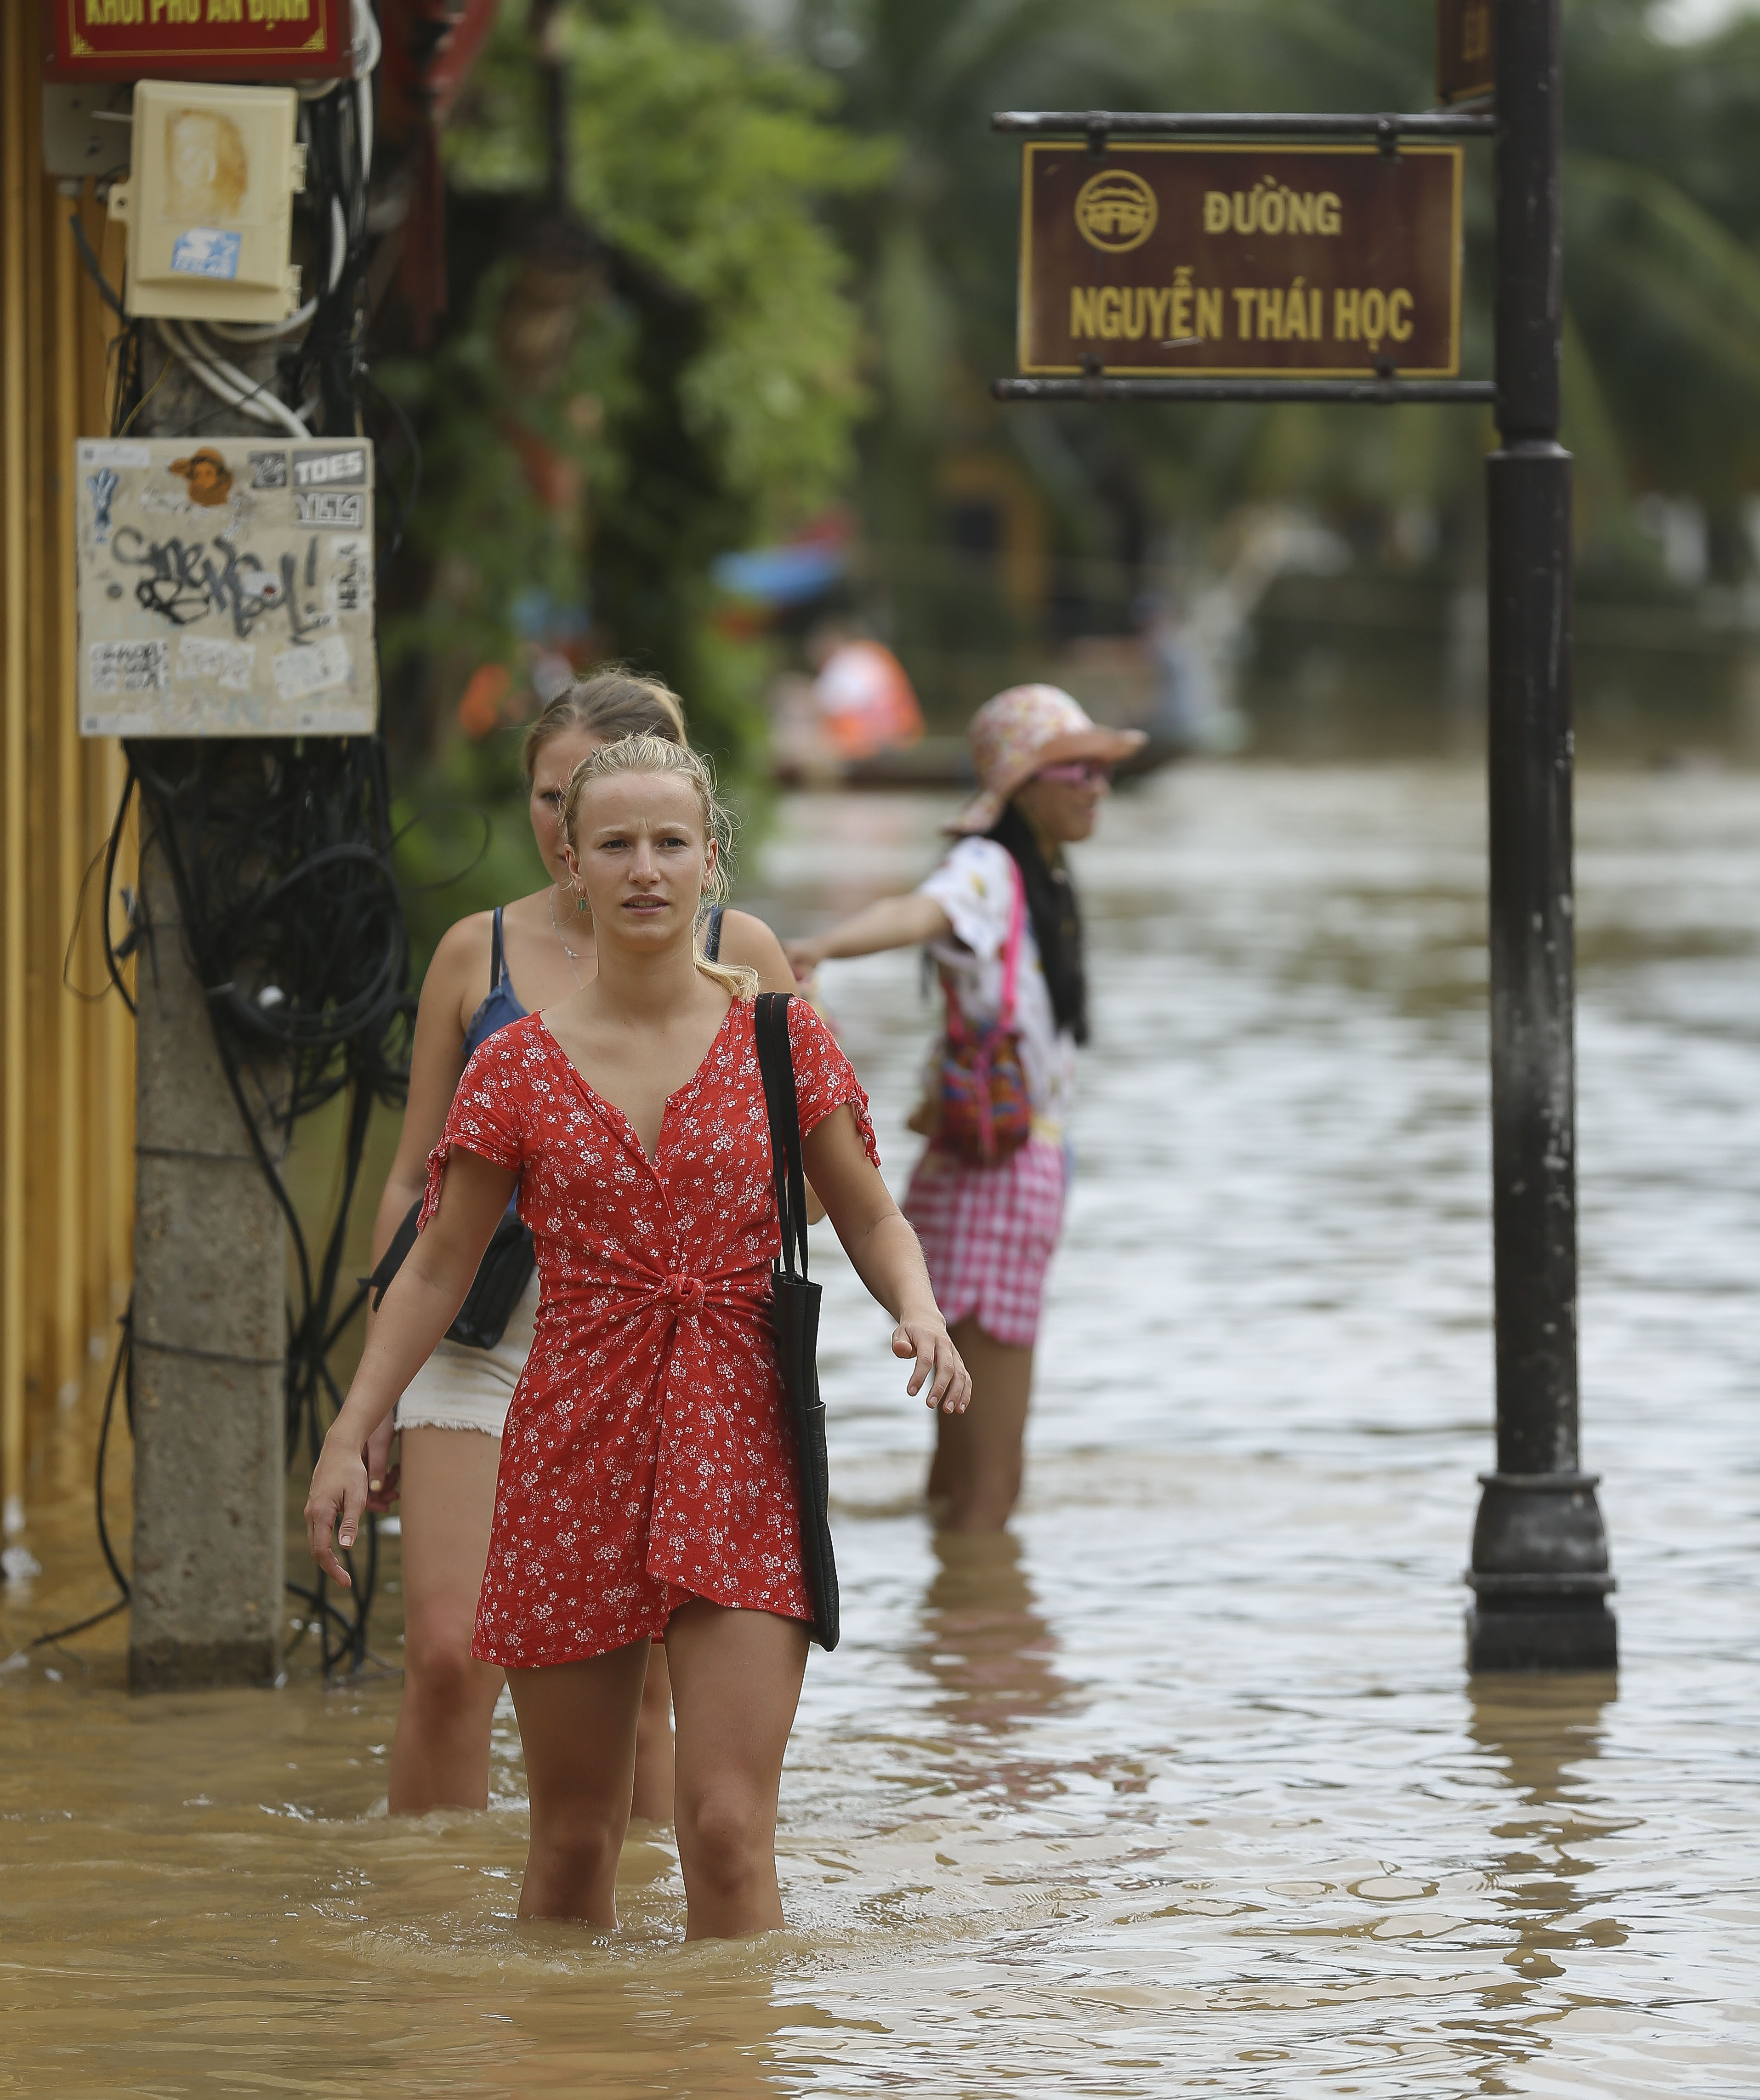 Many foreign tourists are very excited at wading in floodwaters